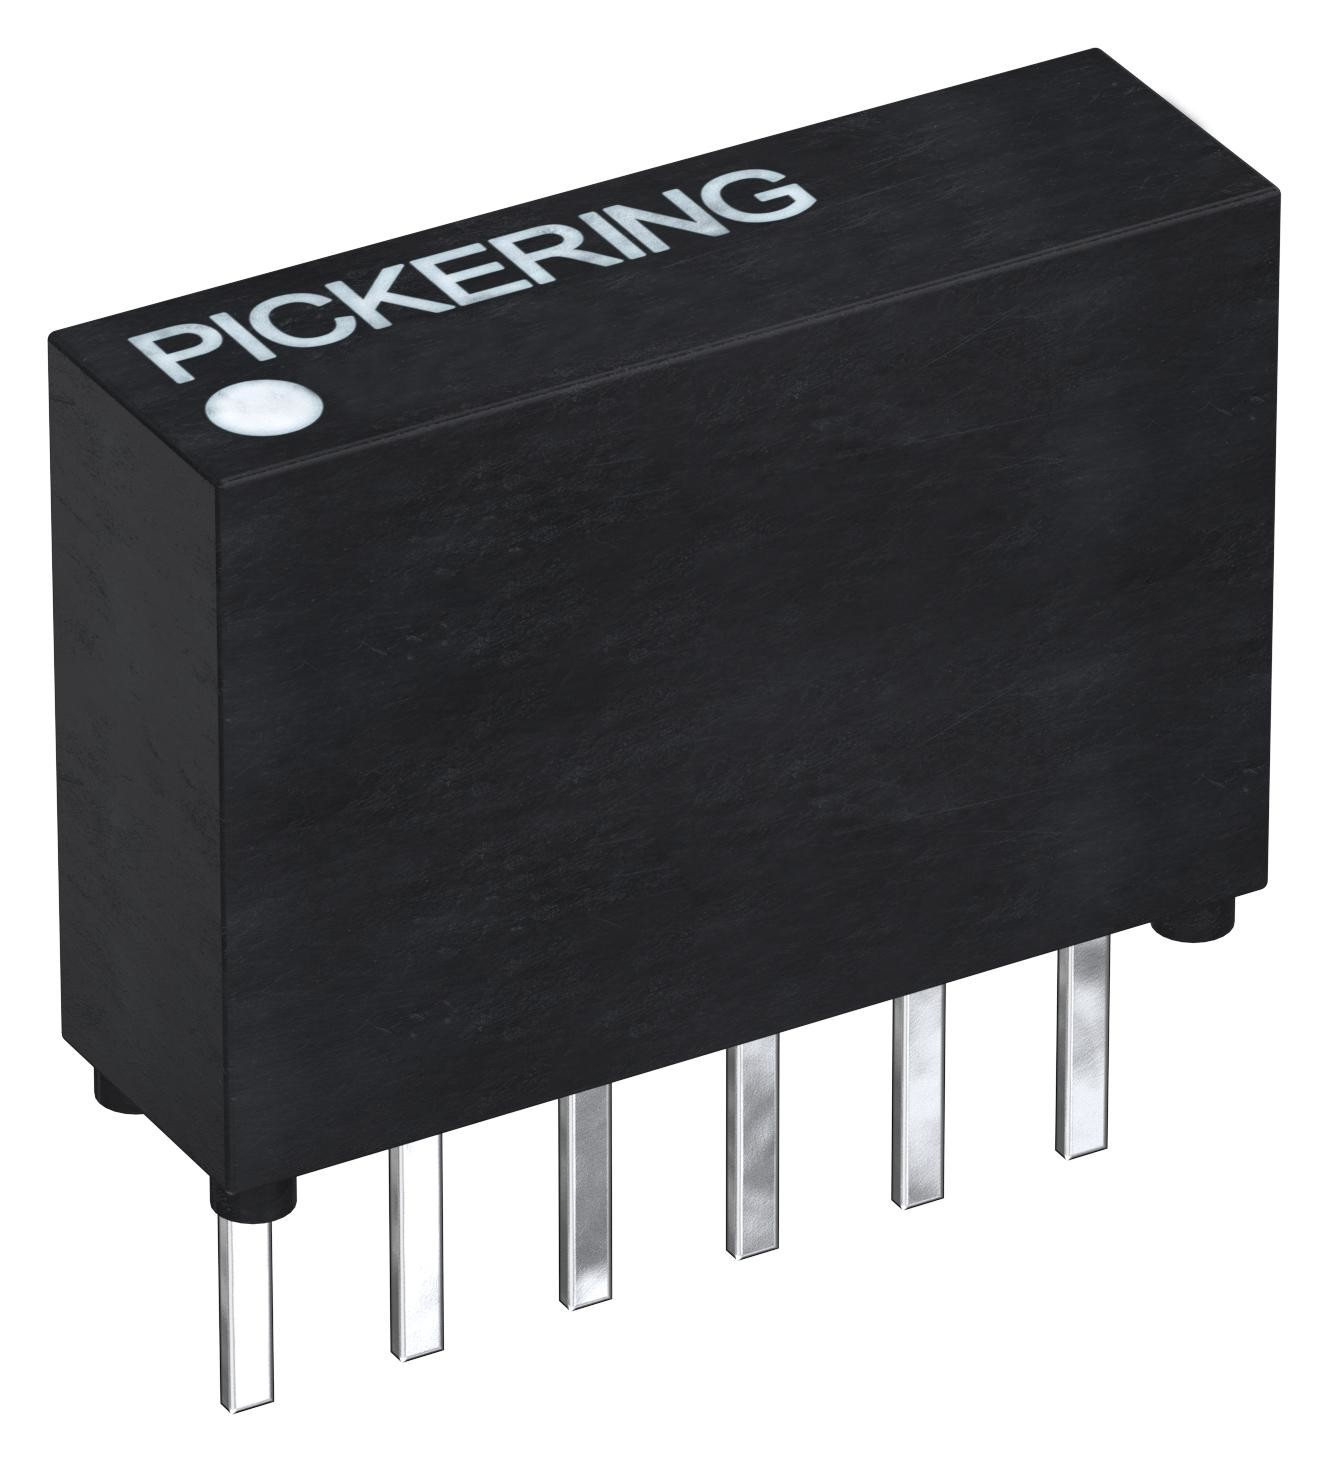 Pickering 113Rf-1-A-3/2D Reed Relay, Spst-No, 3V, 0.5A, Tht